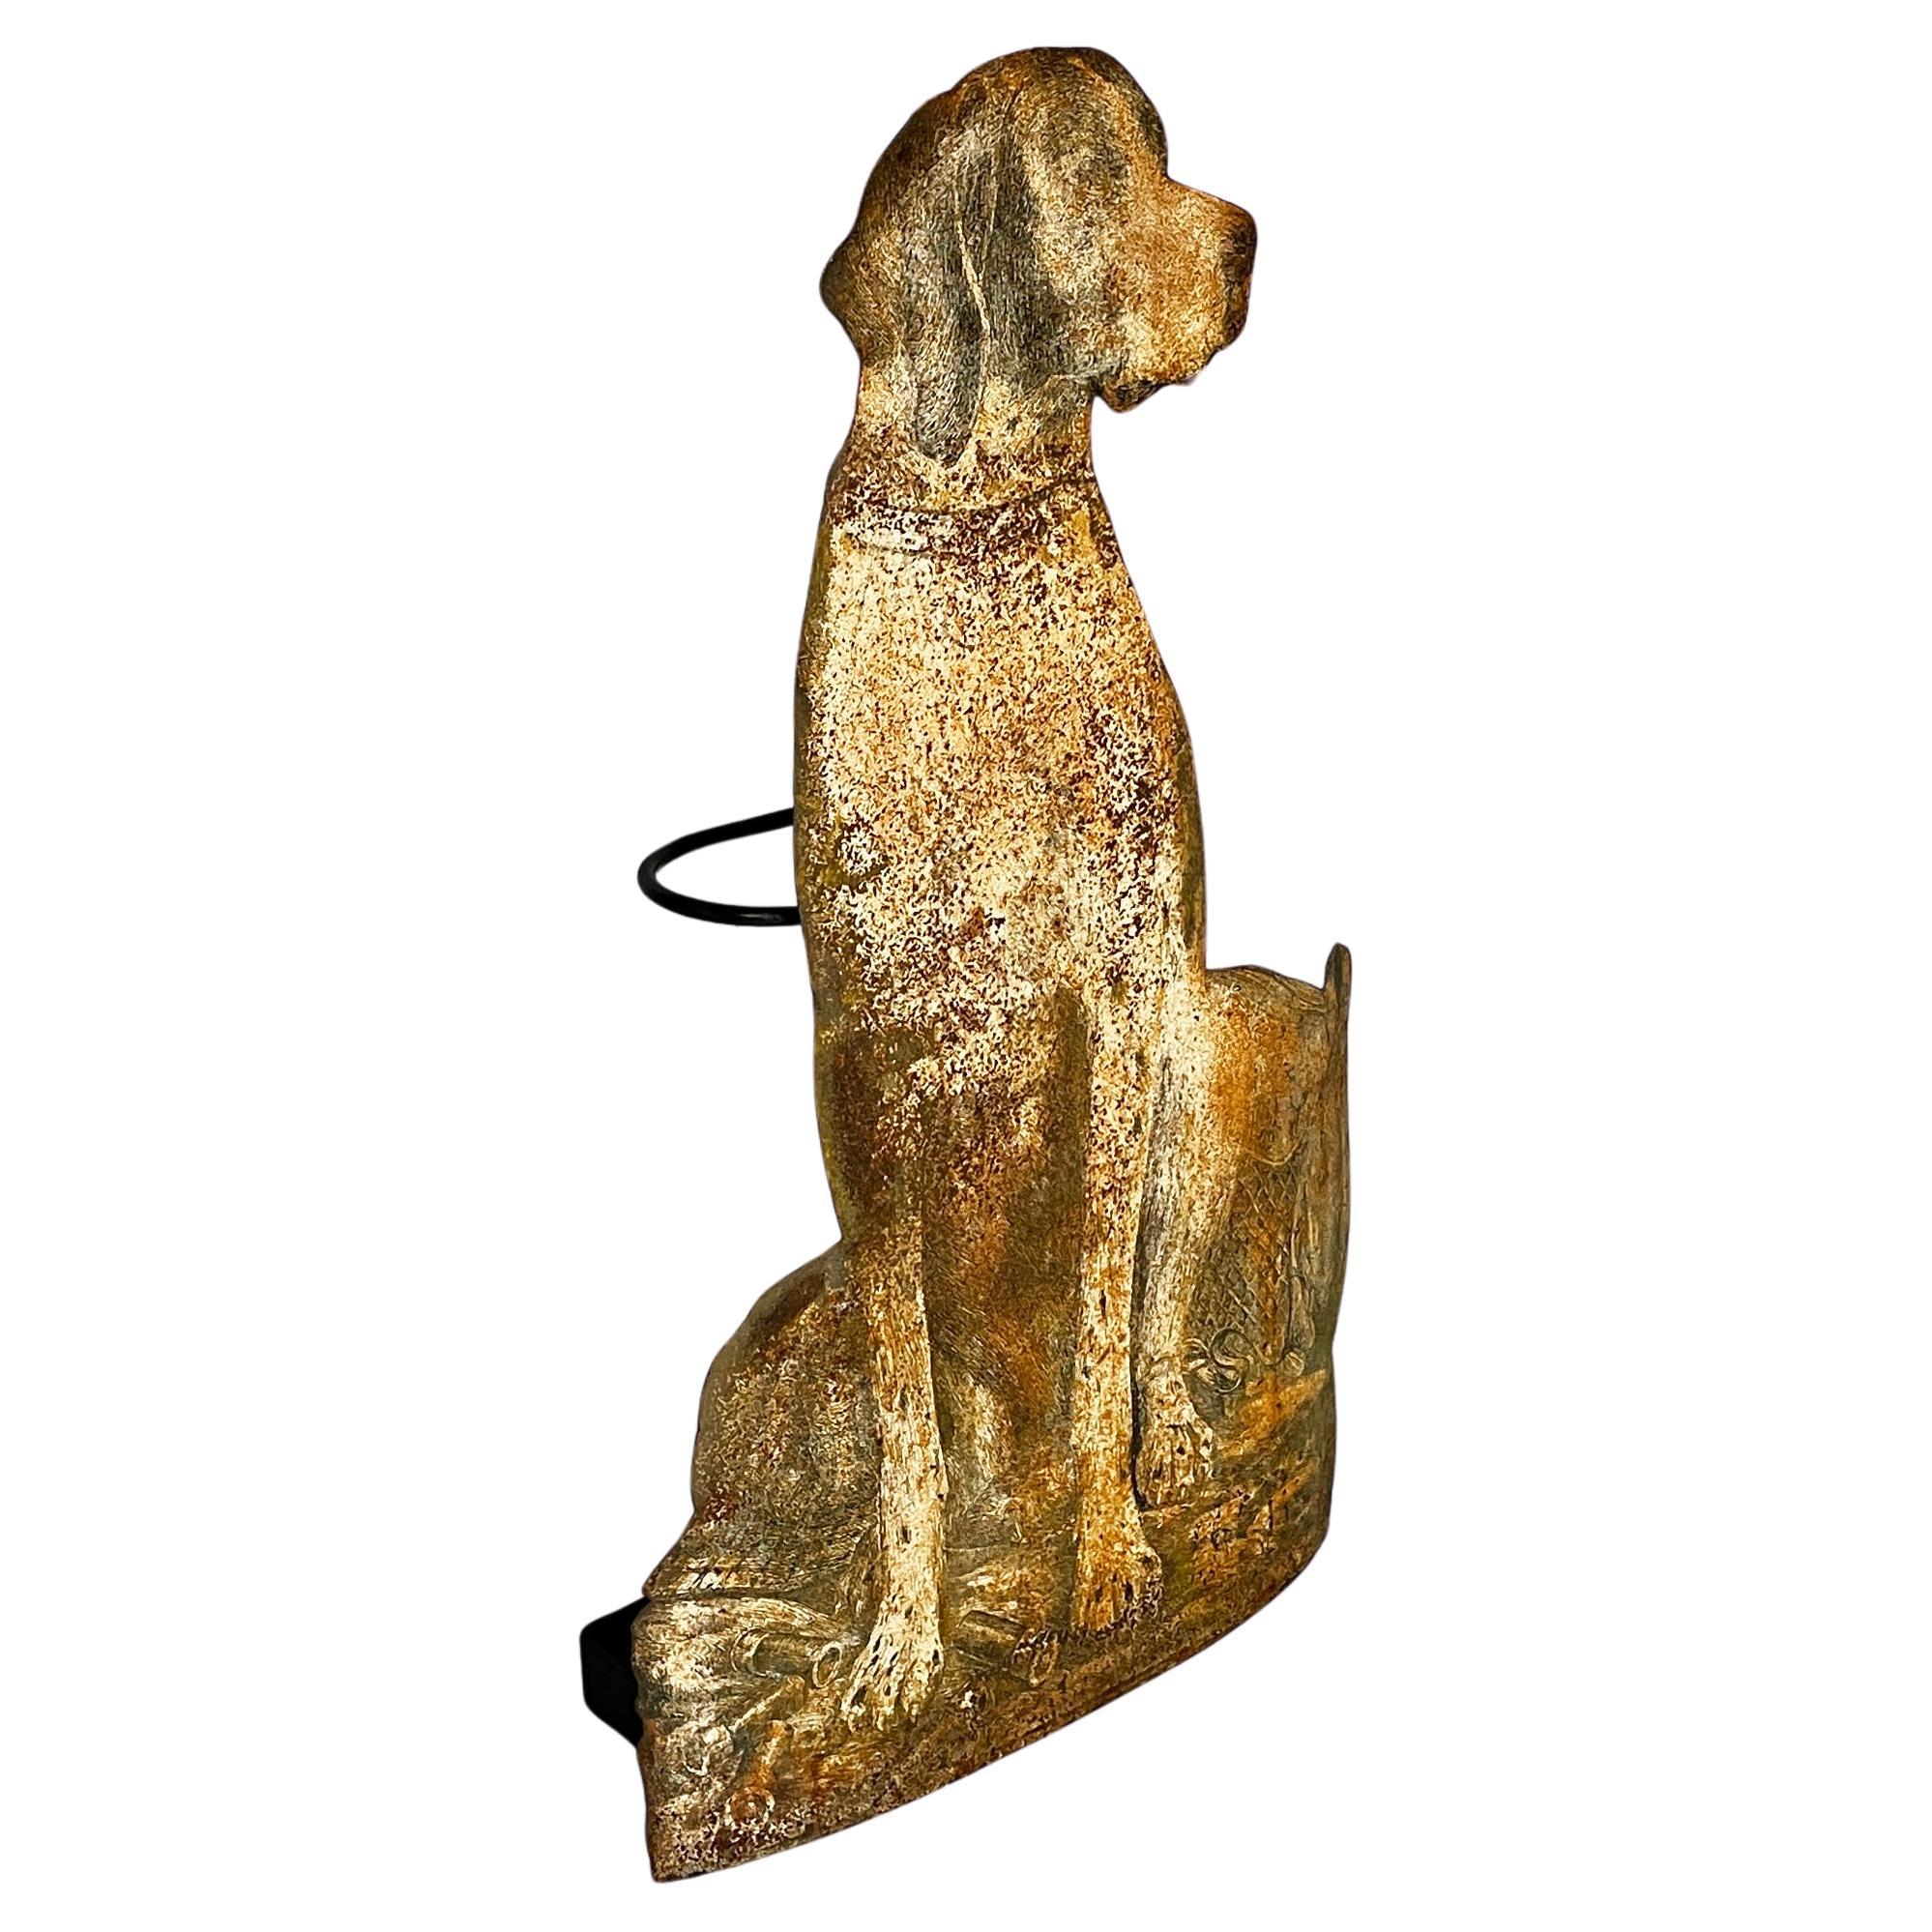 Italian mid-century modern Umbrella stand with dog by Fornasetti, 1950s